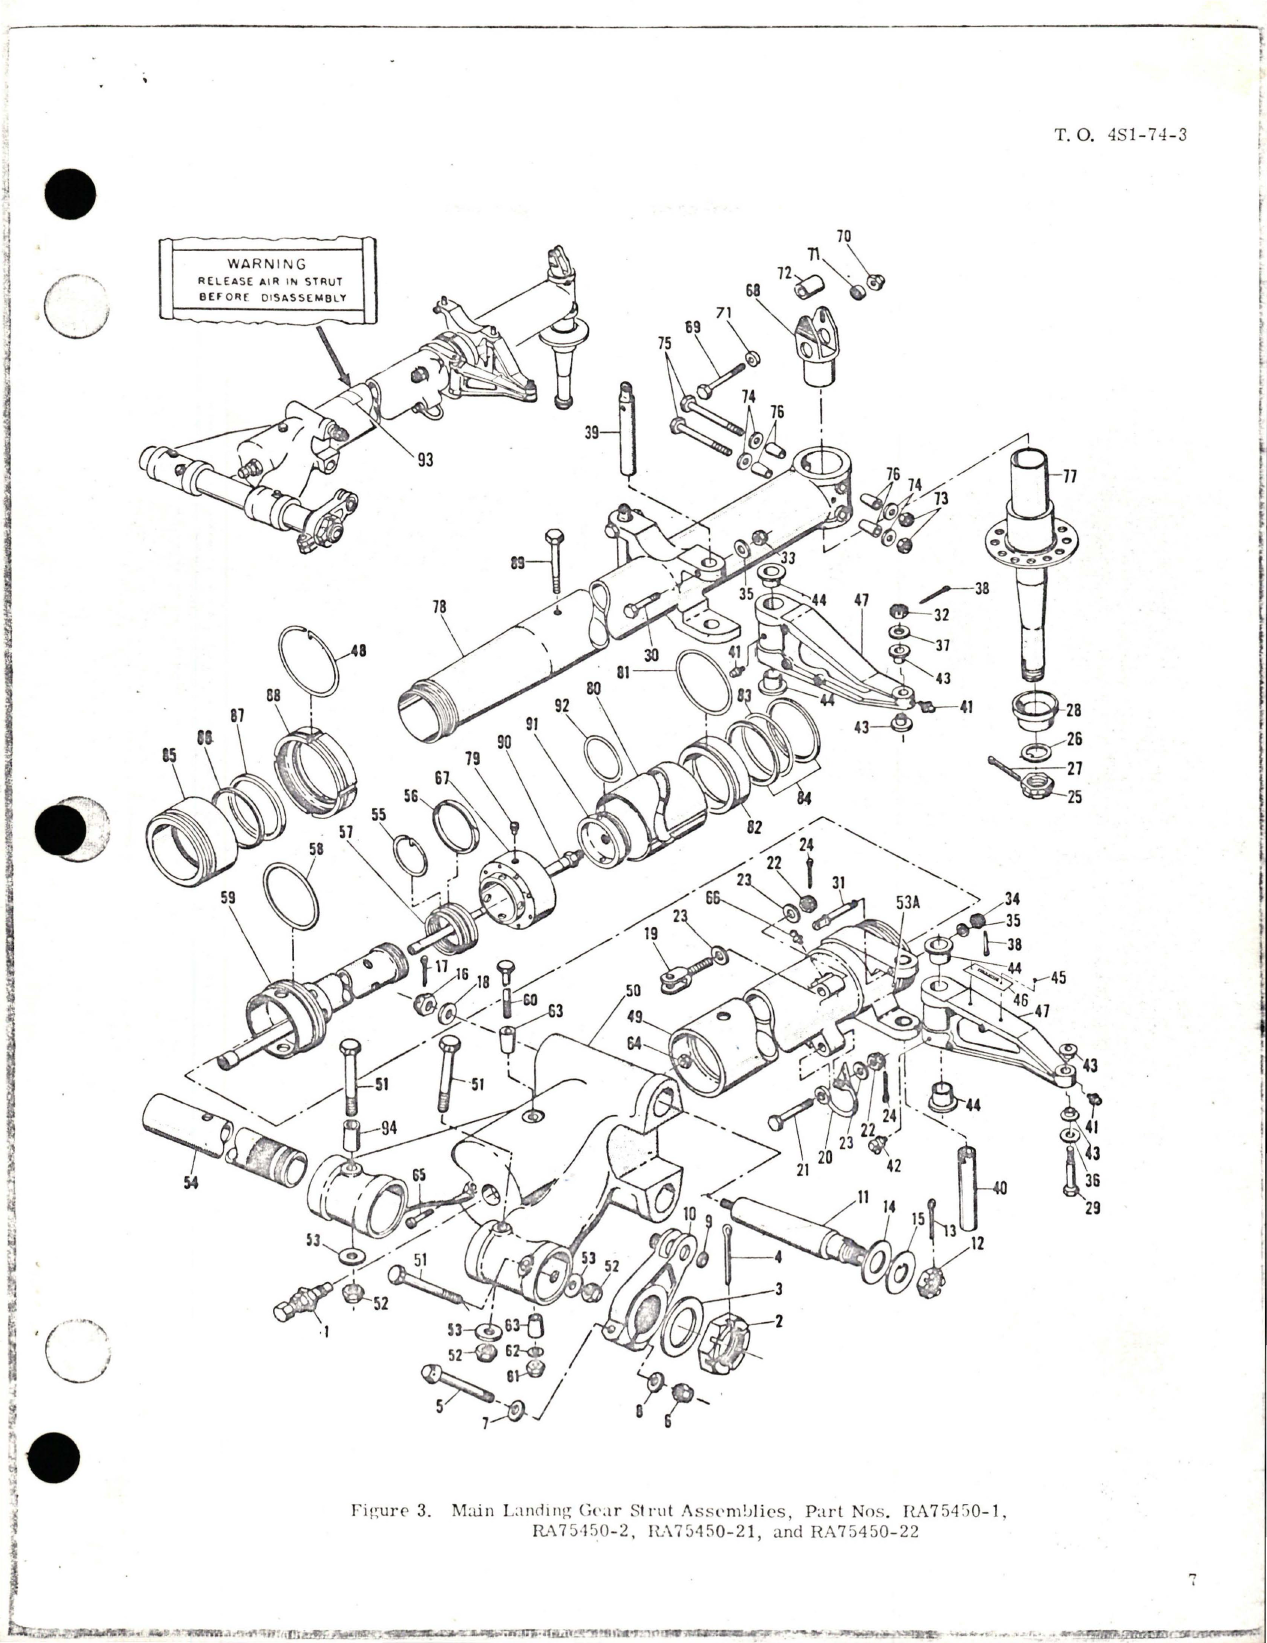 Sample page 7 from AirCorps Library document: Overhaul Instructions with Parts Breakdown for Main Landing Gear Strut Assemblies - Parts RA75450-1, RA75450-2, RA75450-21, and RA75450-22